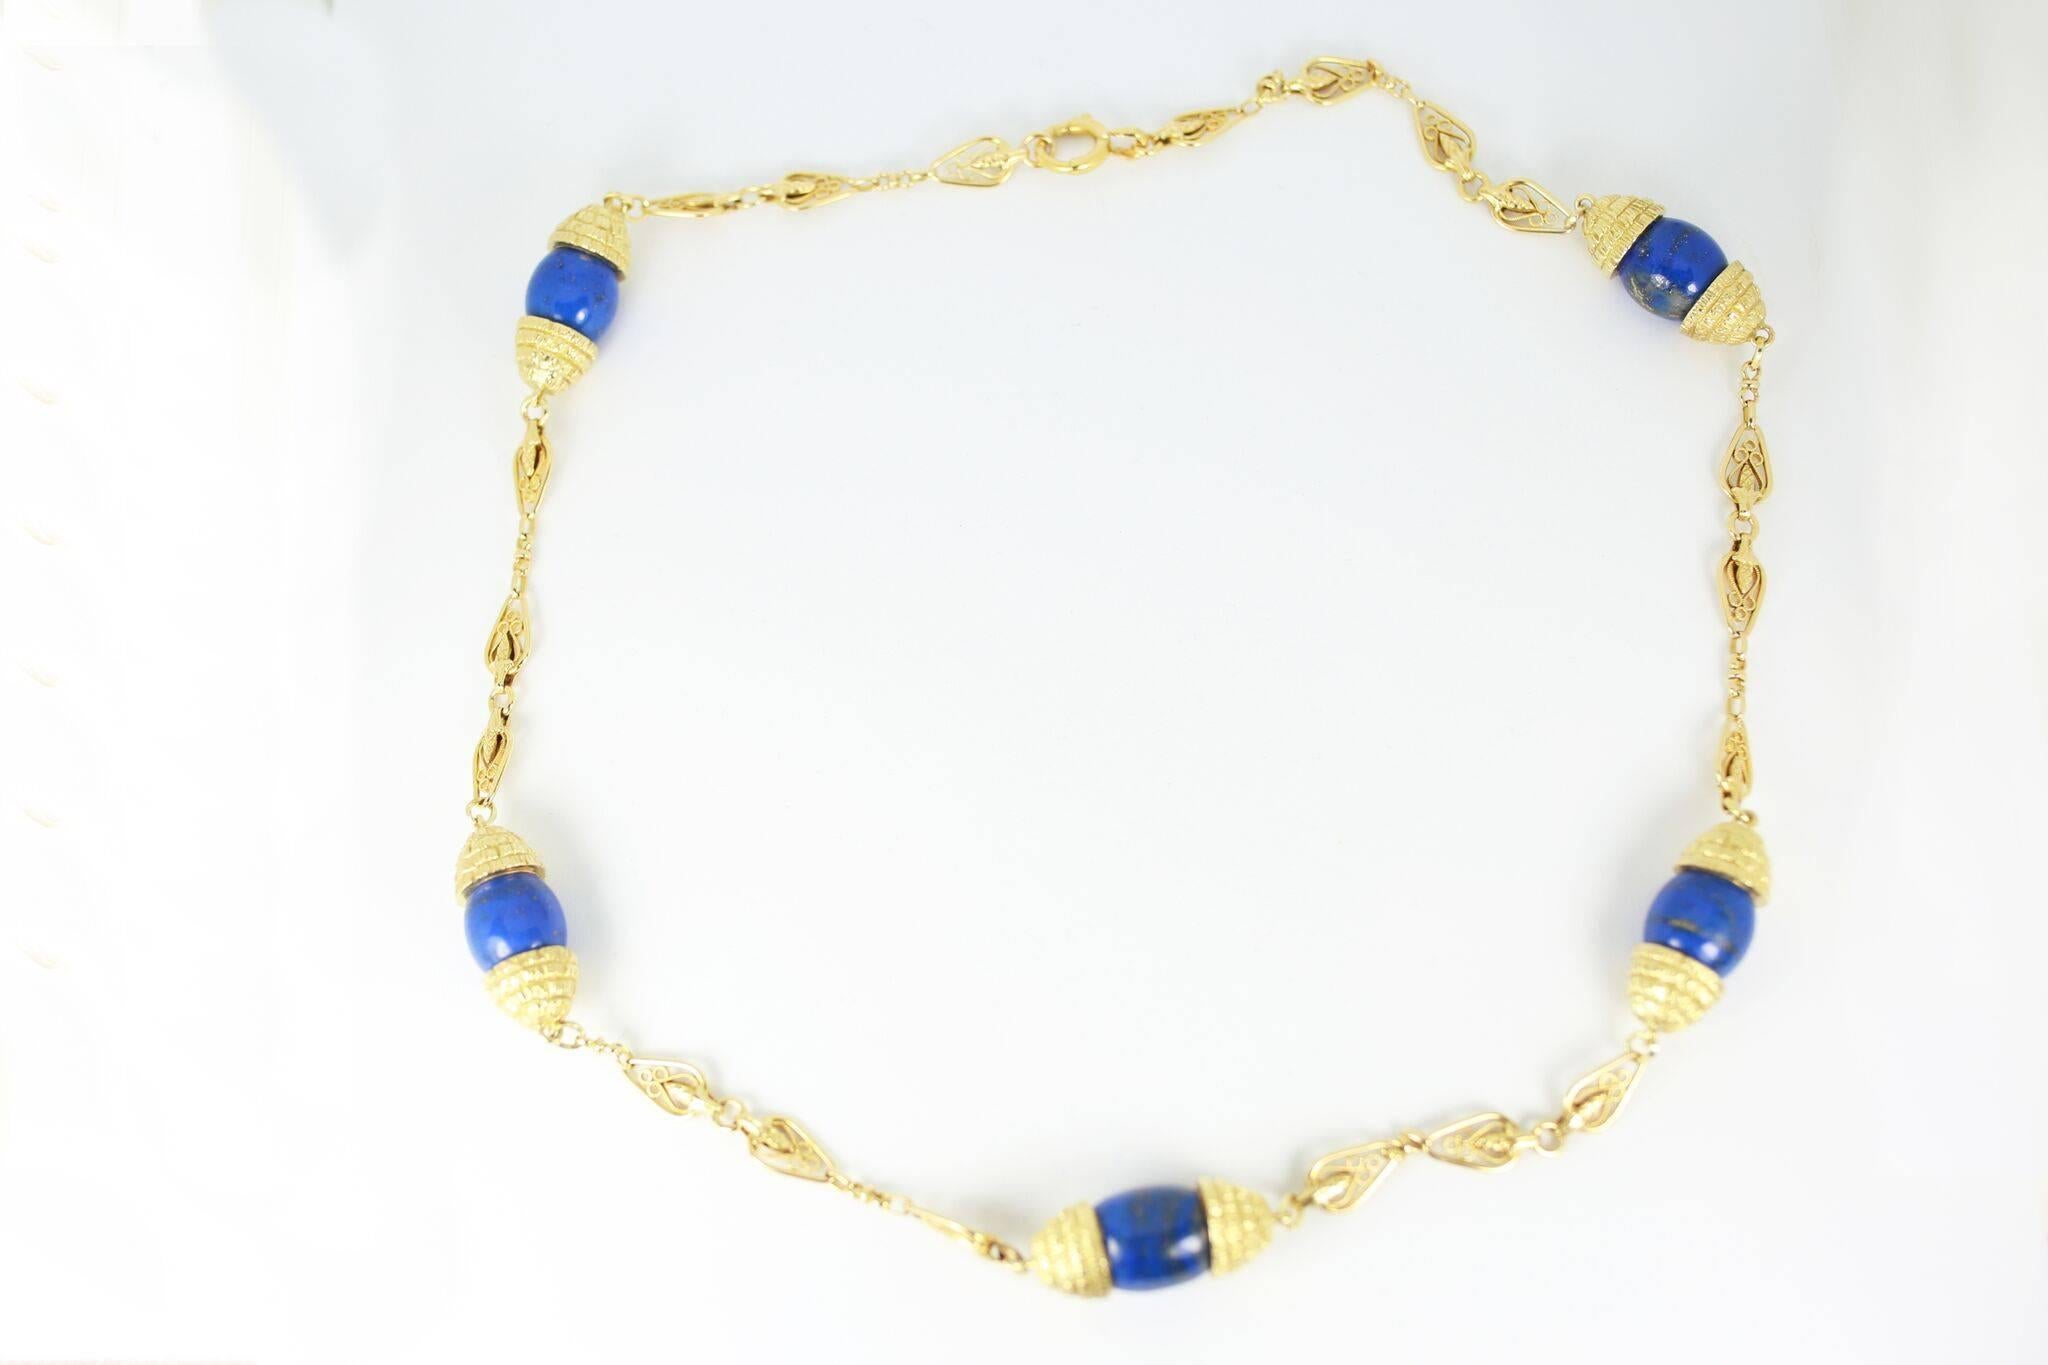 Solid 18K gold link necklace featuring beautiful lapis lazuli.